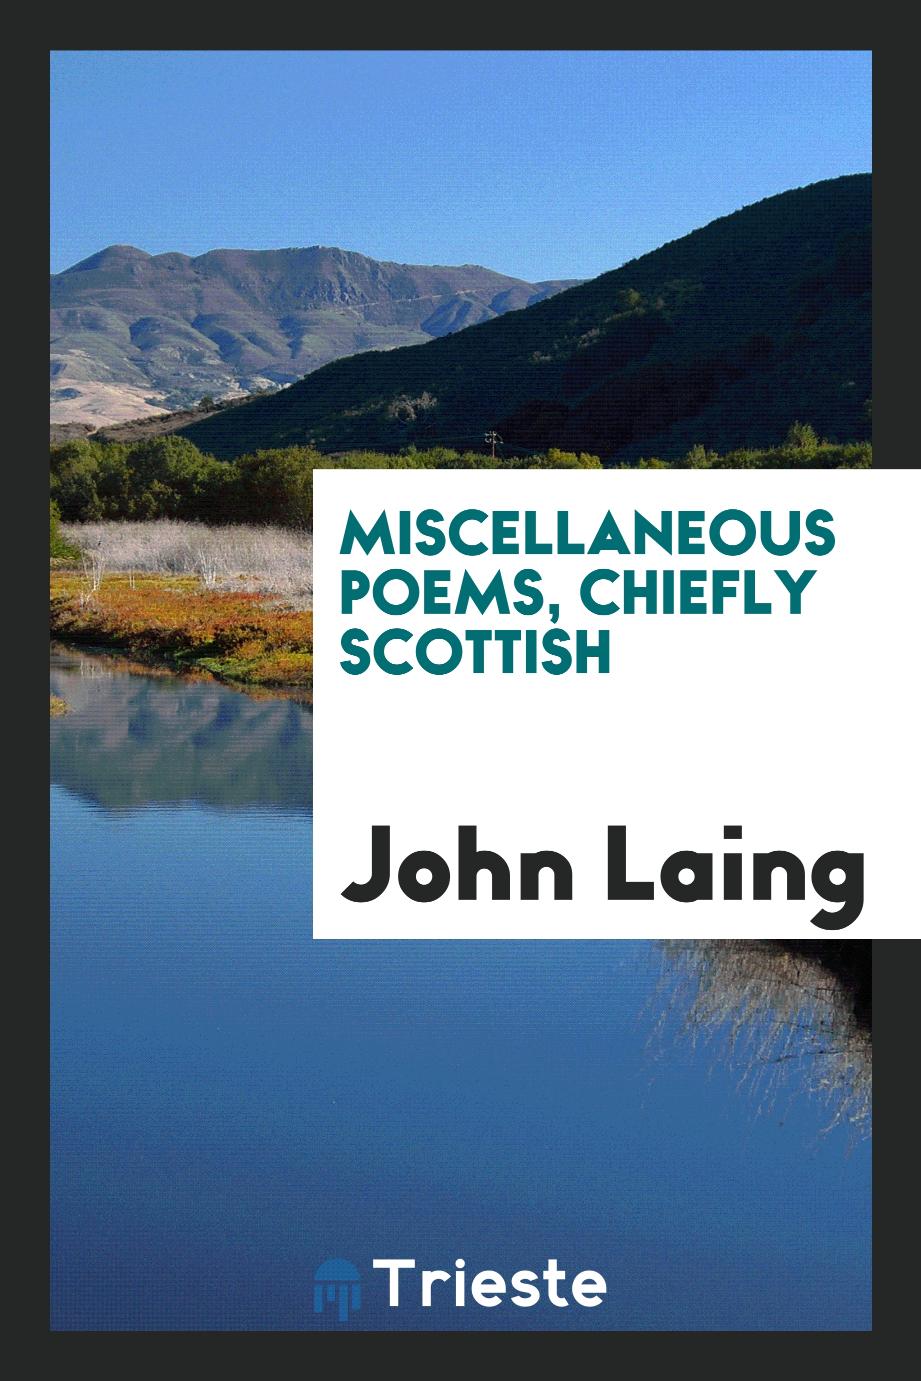 Miscellaneous poems, chiefly Scottish